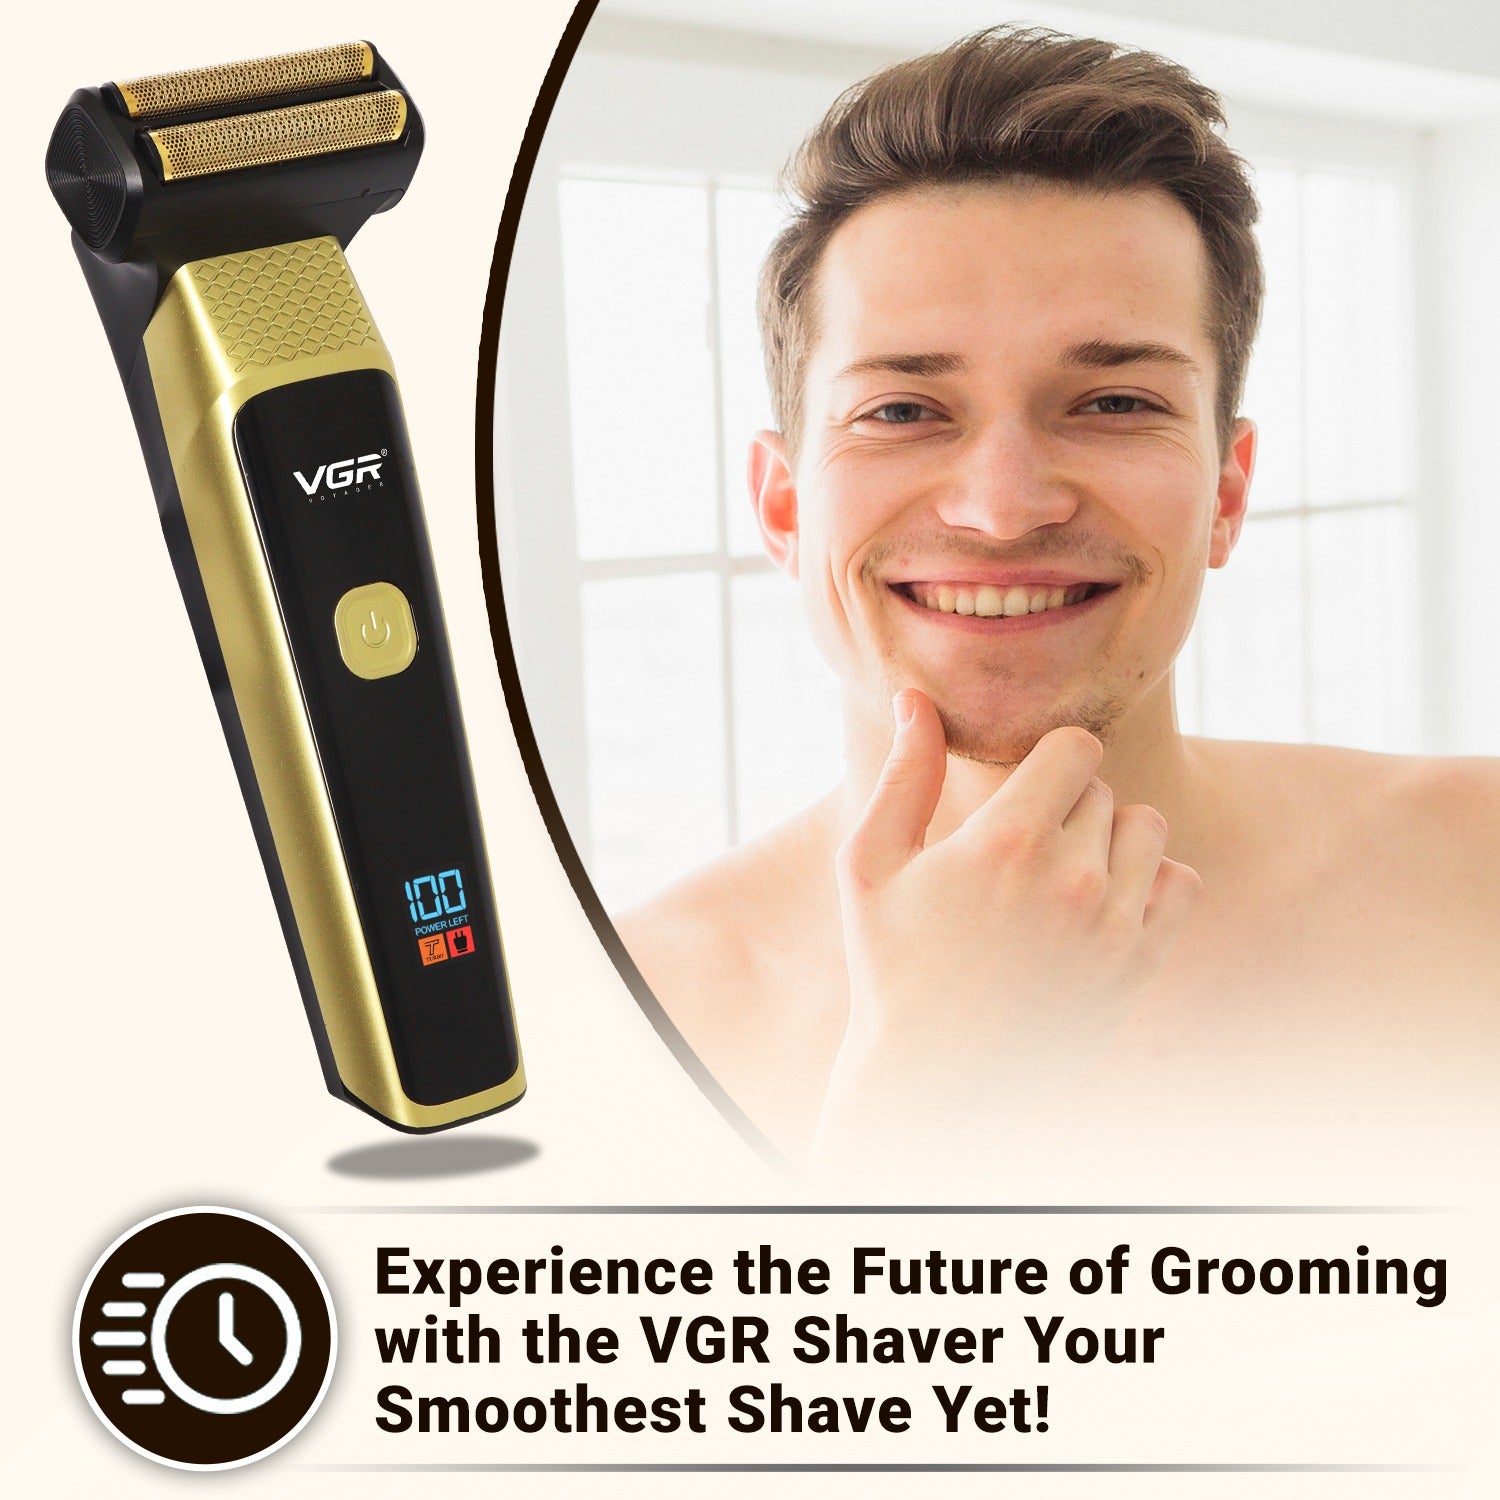 VGR VL-366 Limited Edition Professional 3 in 1 Grooming Kit, (Gold)